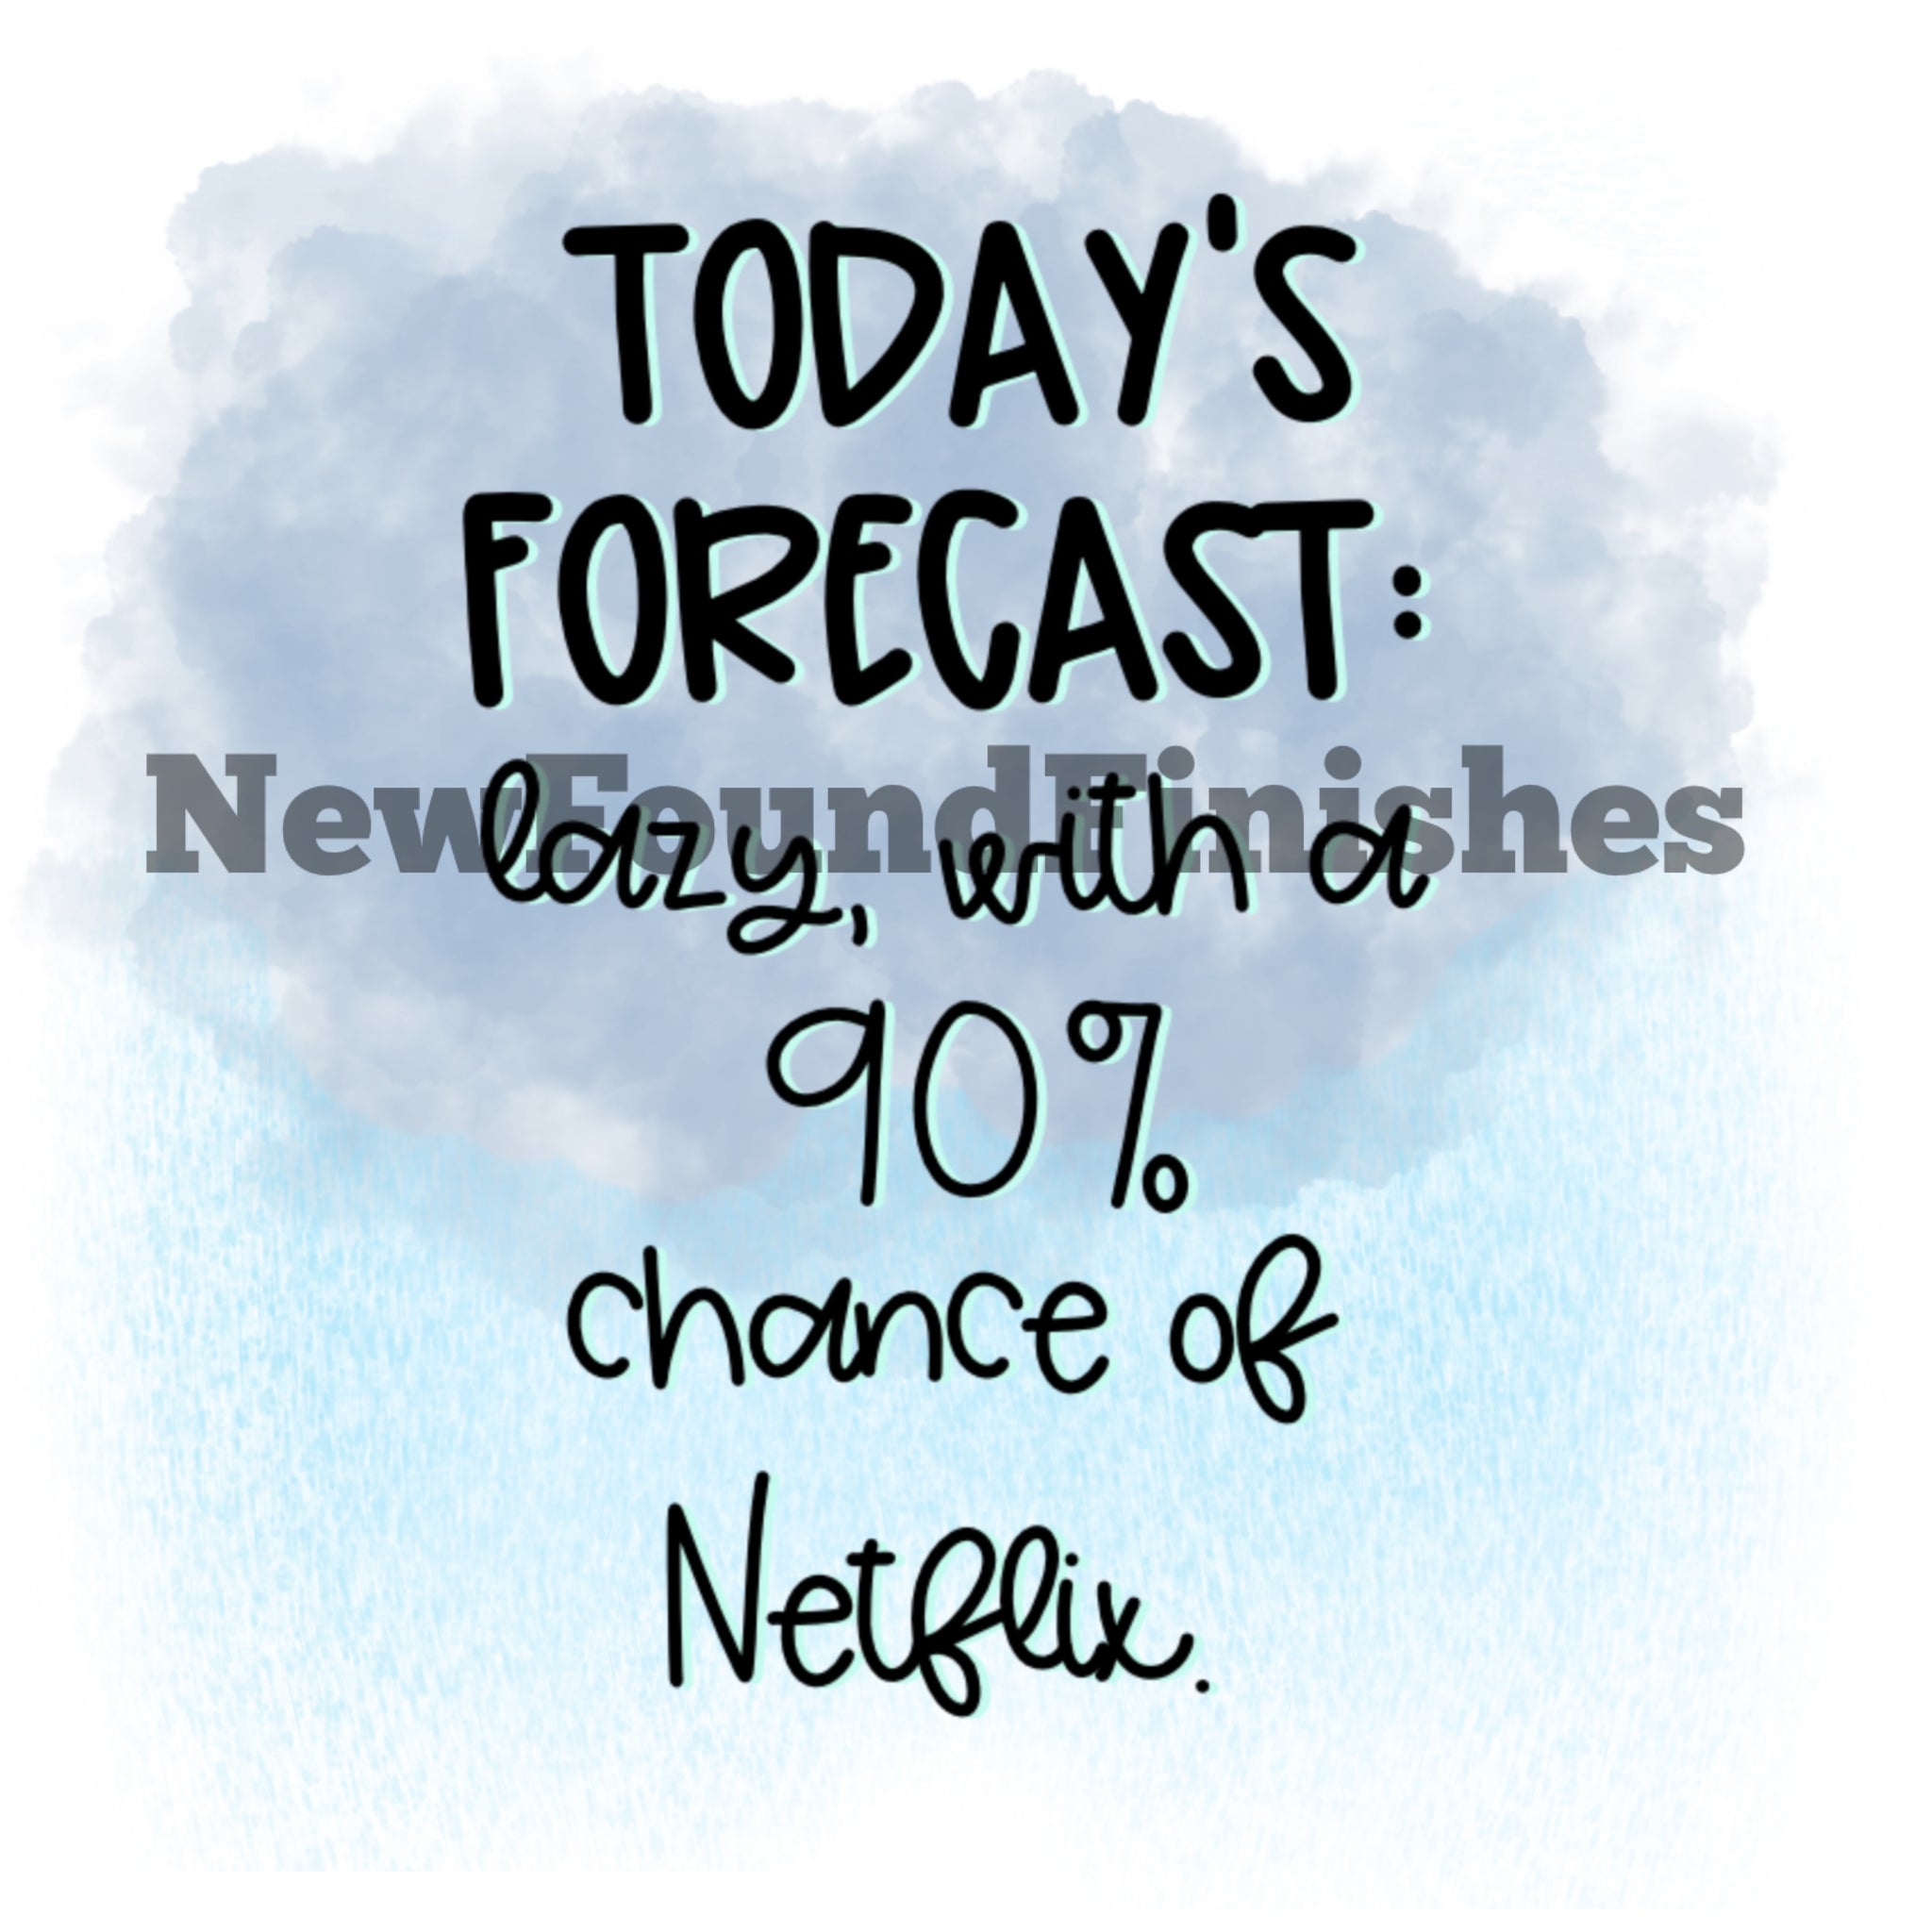 Today’s forecast